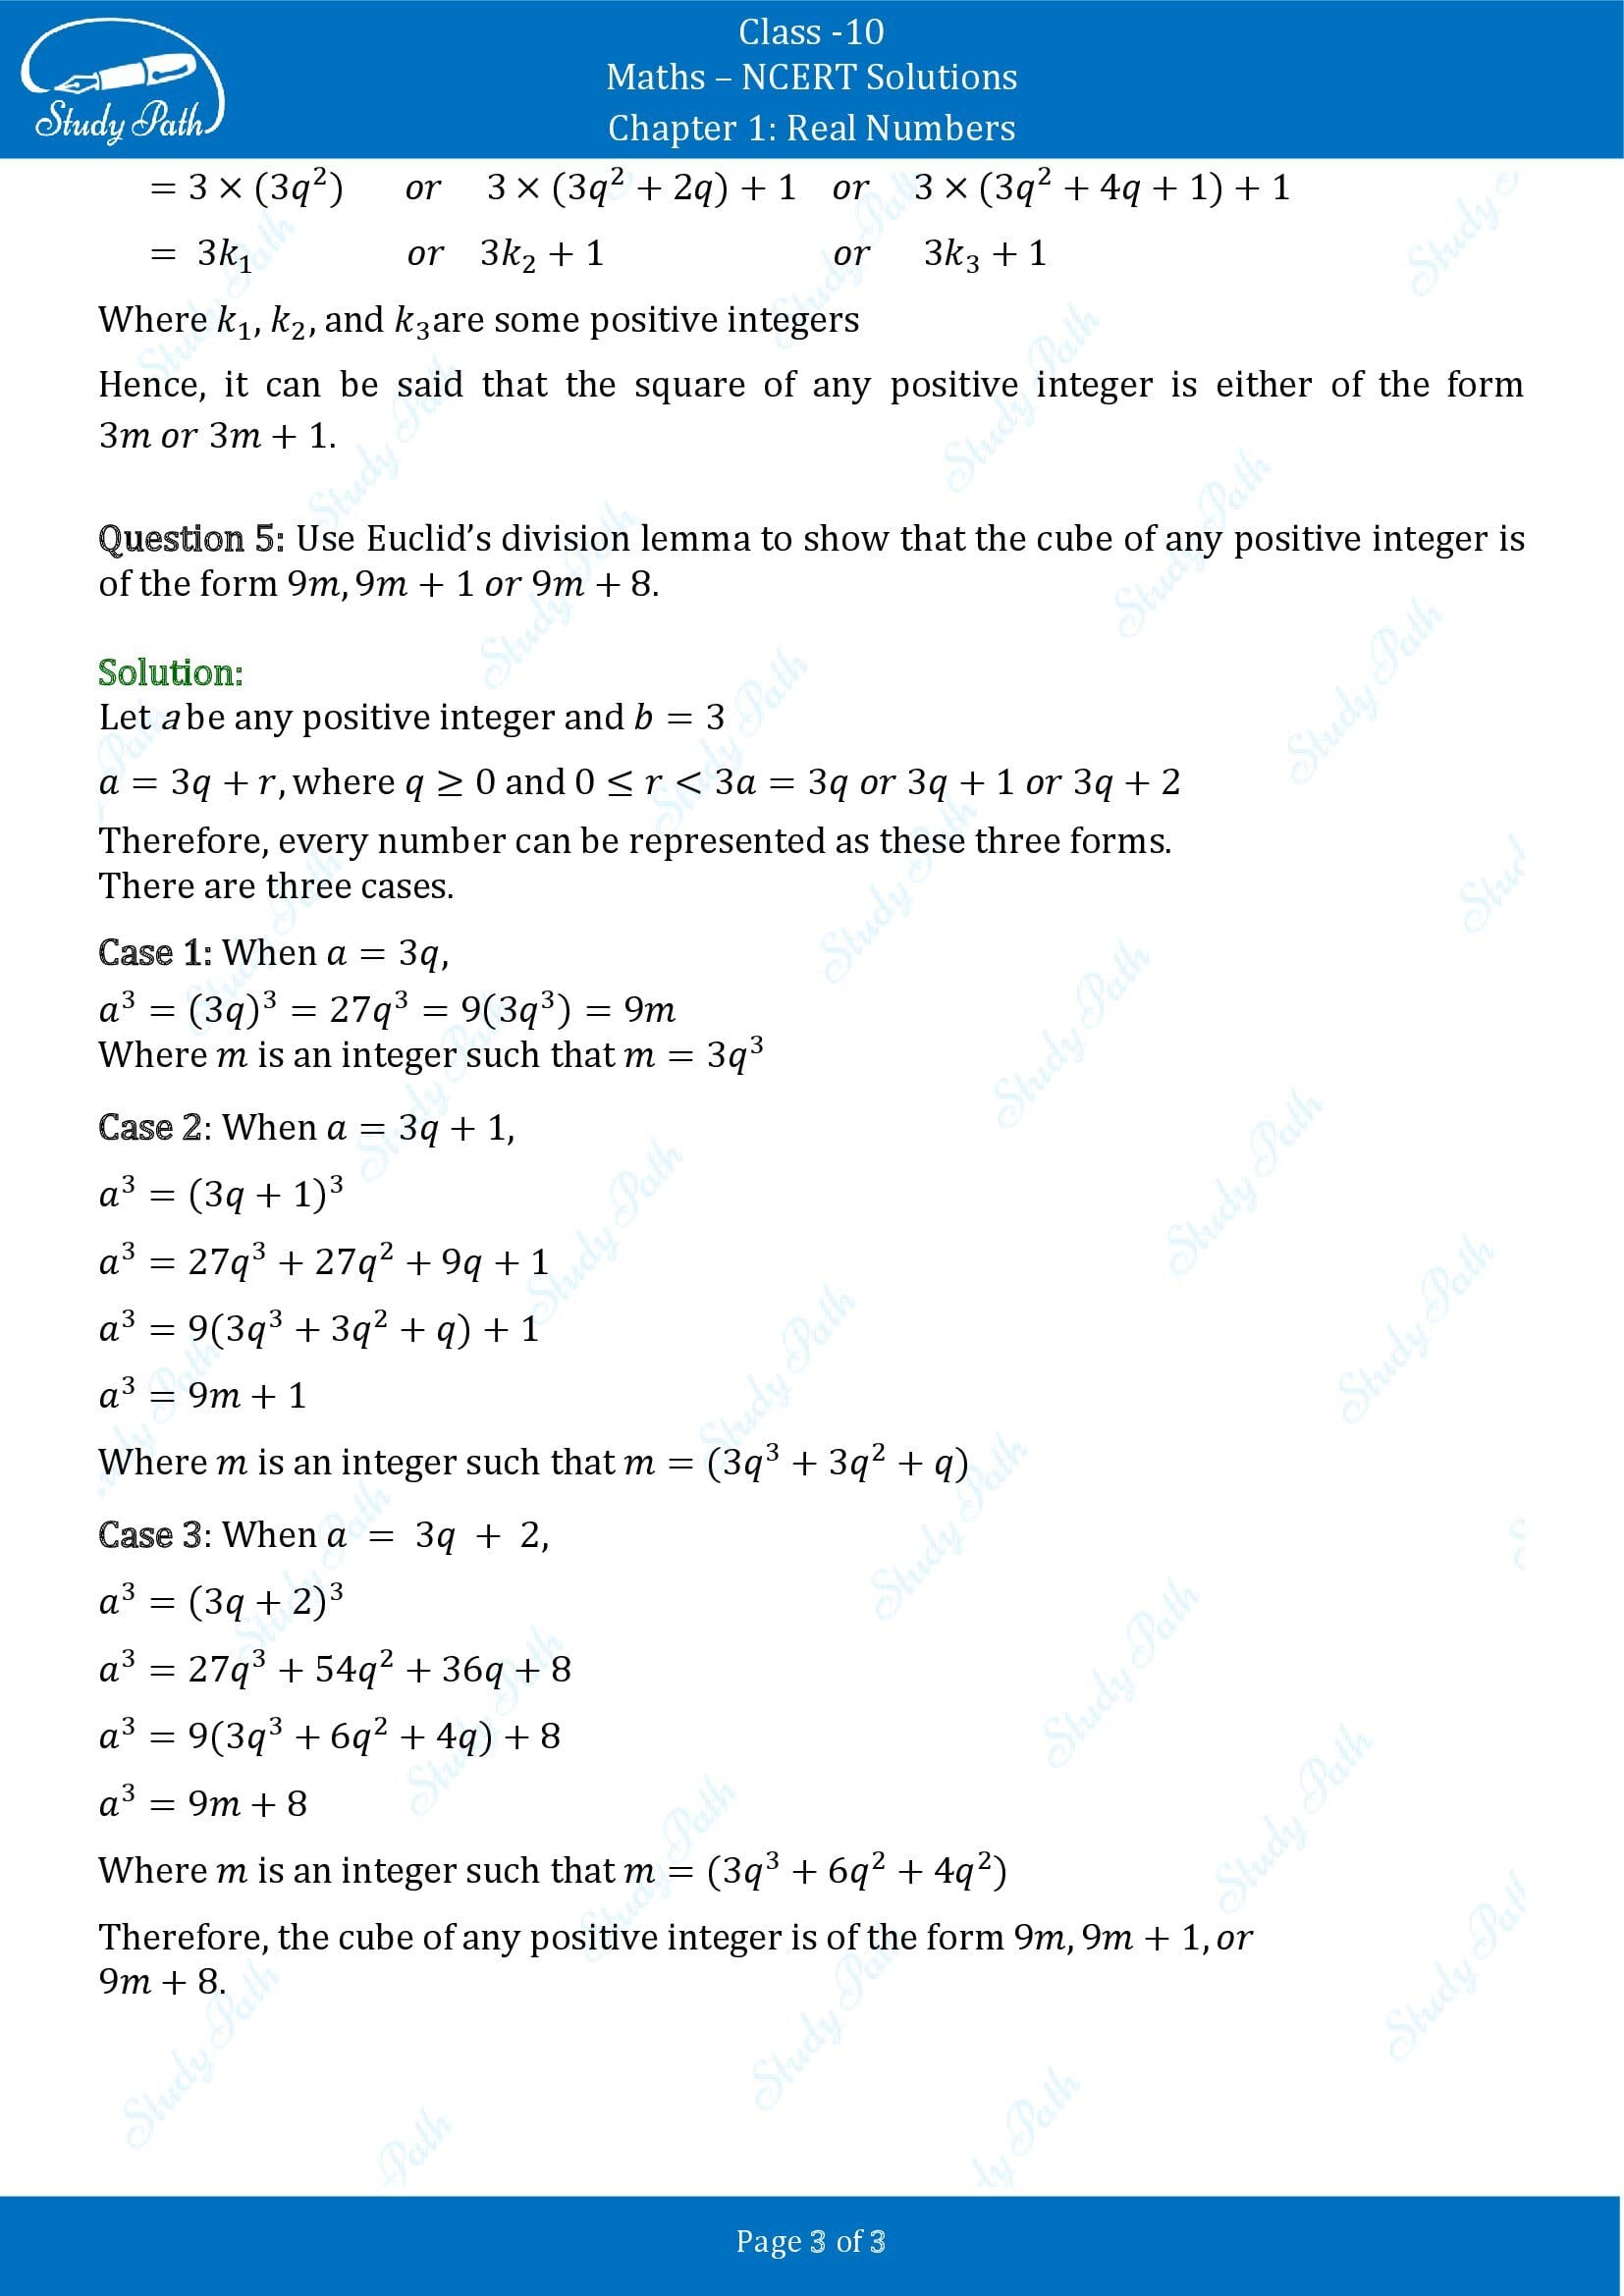 NCERT Solutions for Class 10 Maths Chapter 1 Real Numbers Exercise 1.1 00003